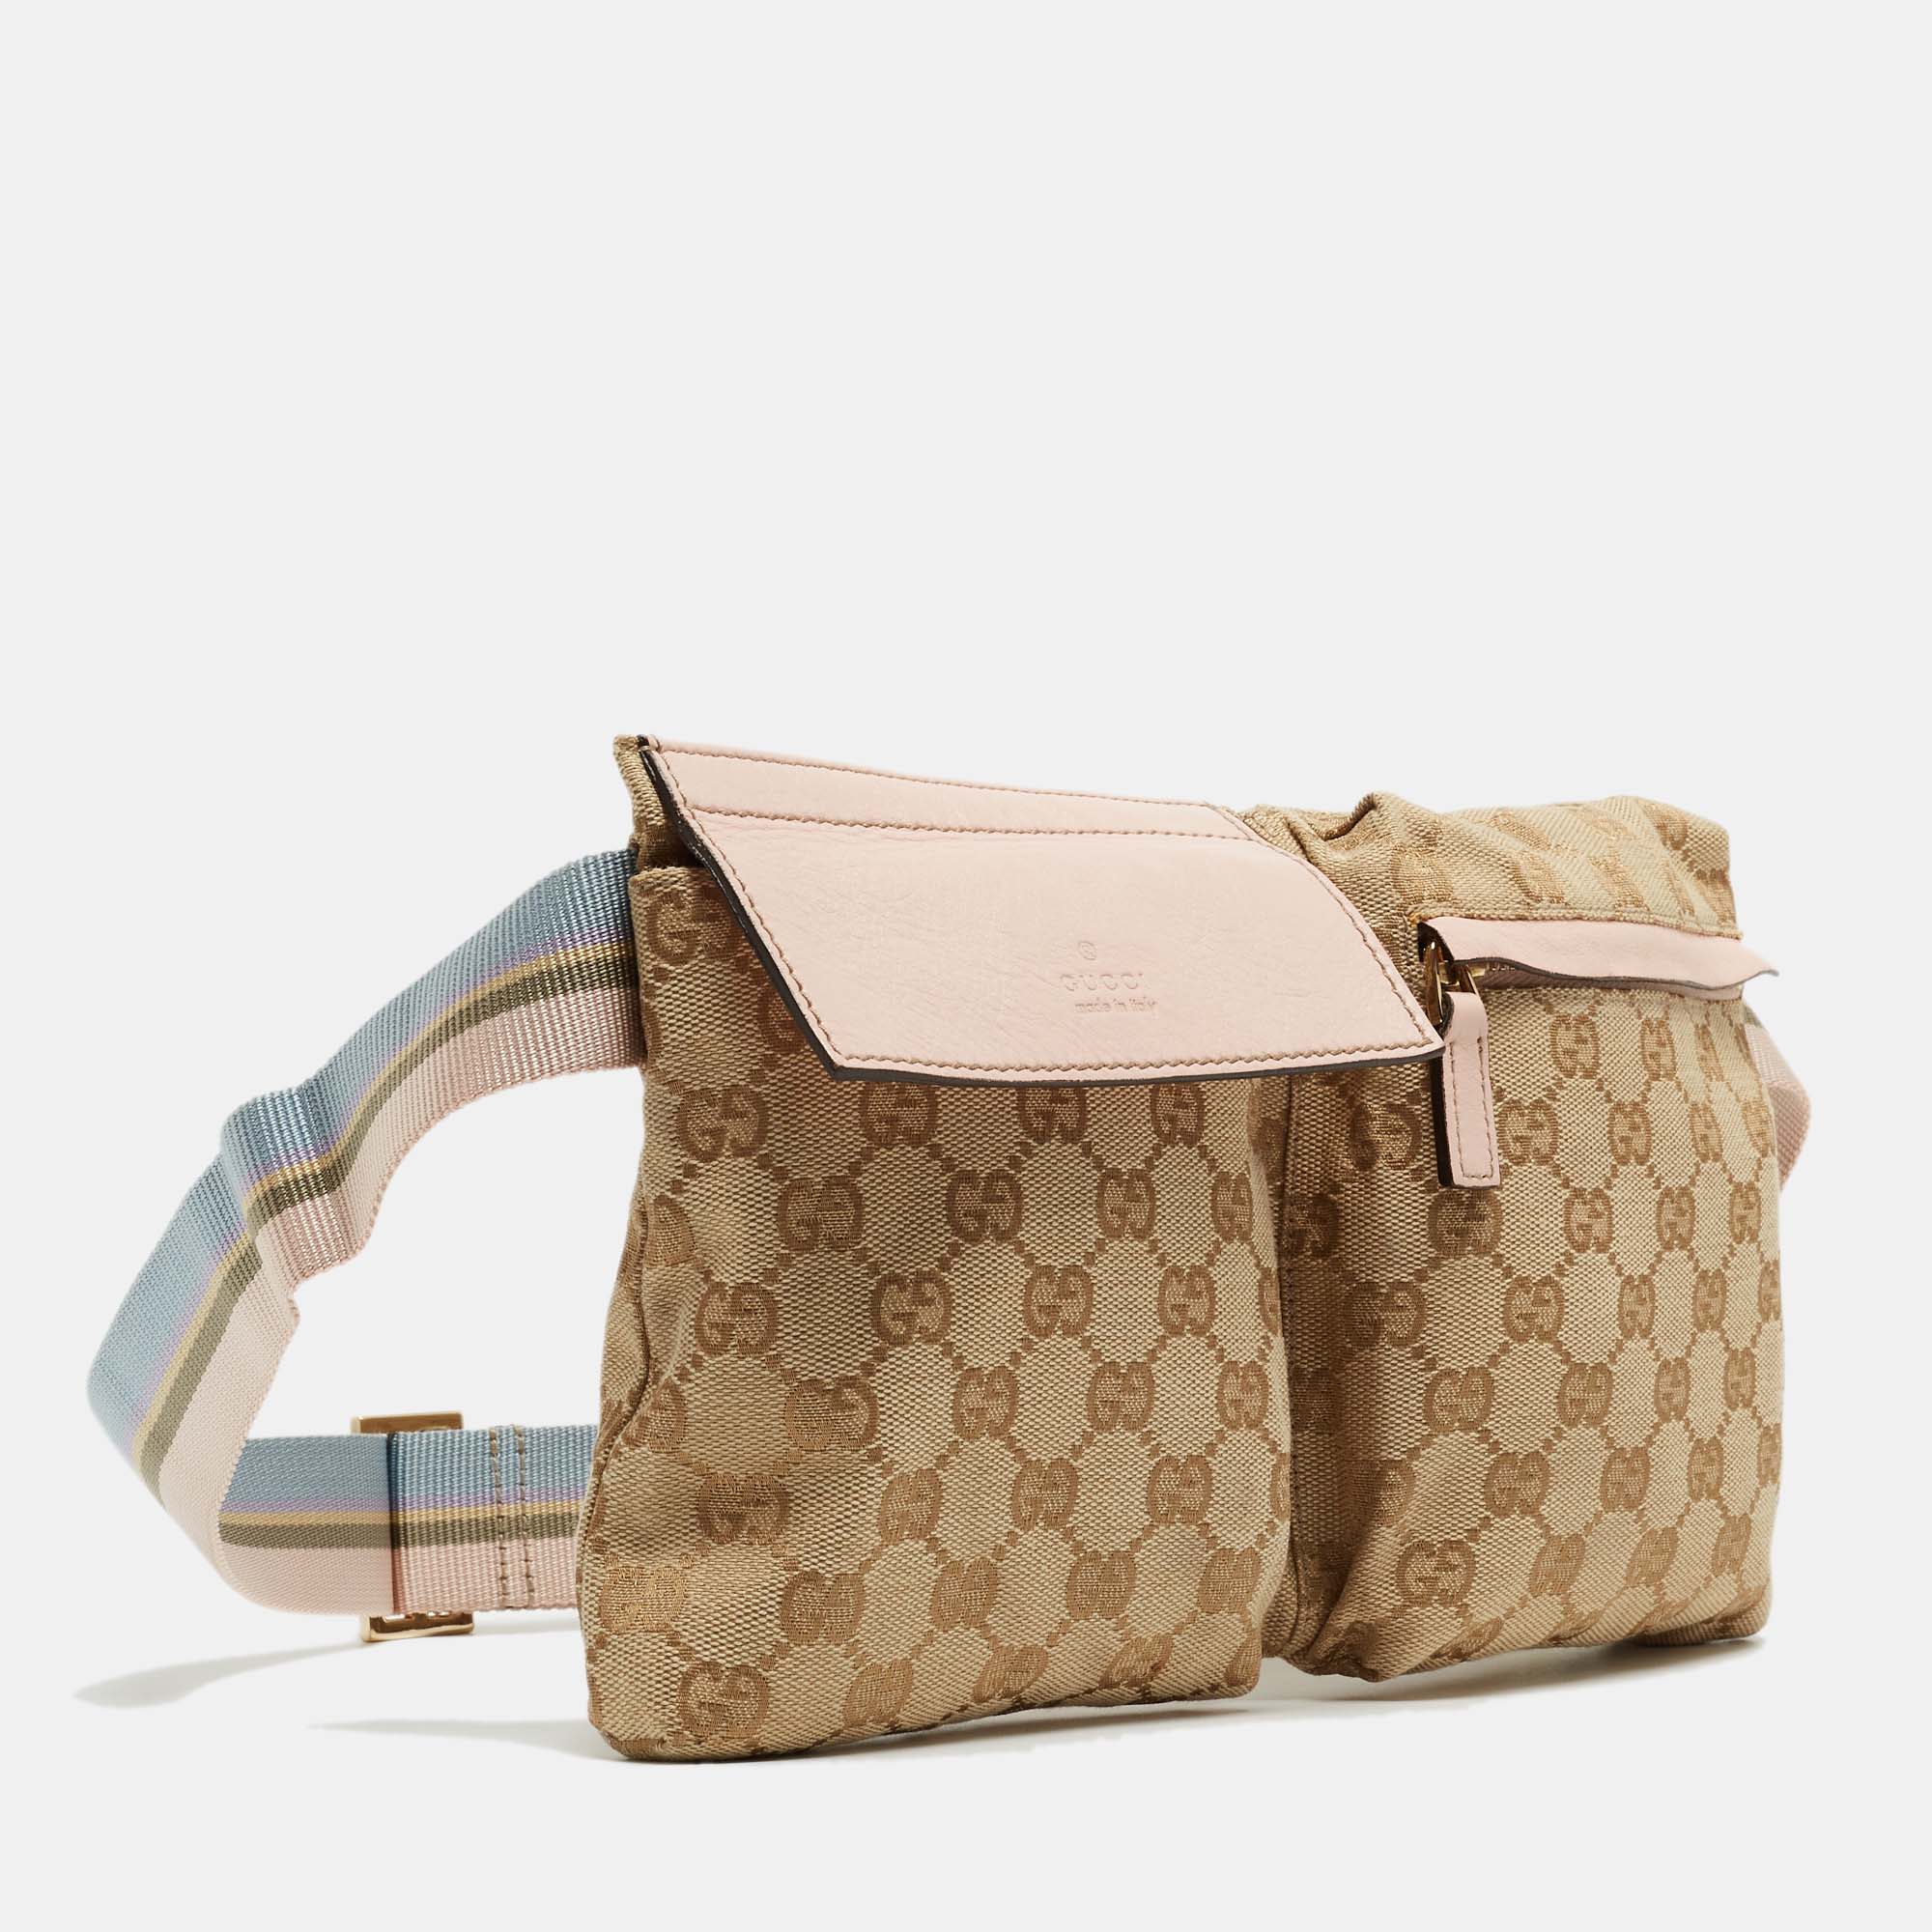 Gucci Beige/Pink GG Canvas And Leather Double Pocket Belt Bag